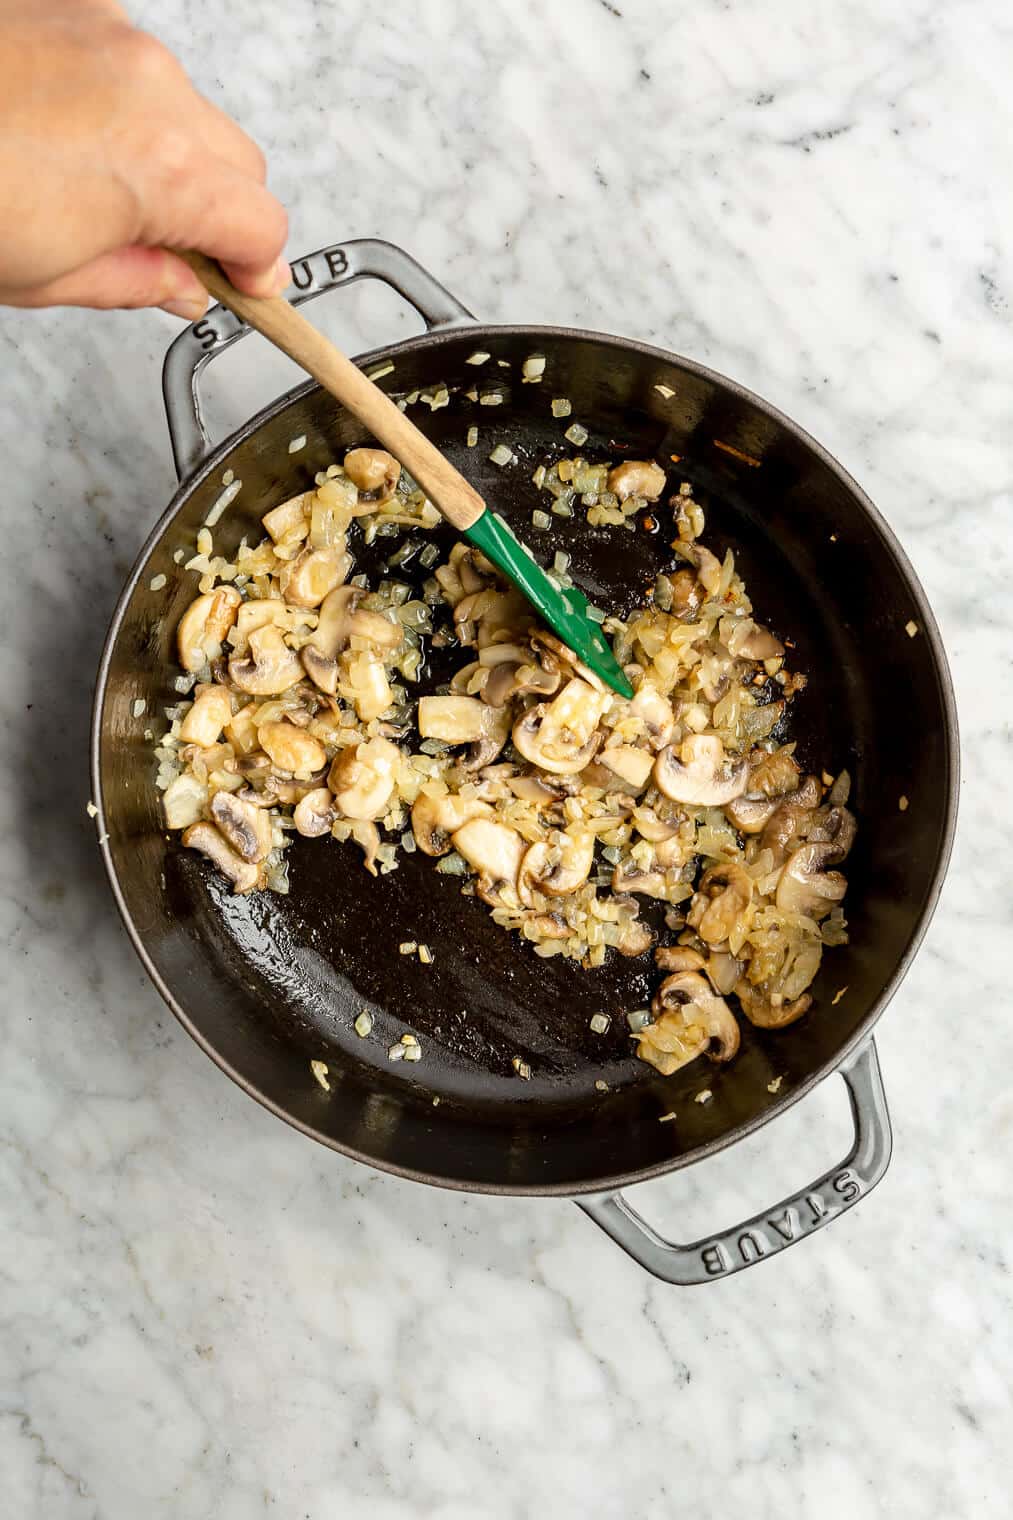 Someone sautéing mushrooms, garlic, and onions in a cast iron pan.